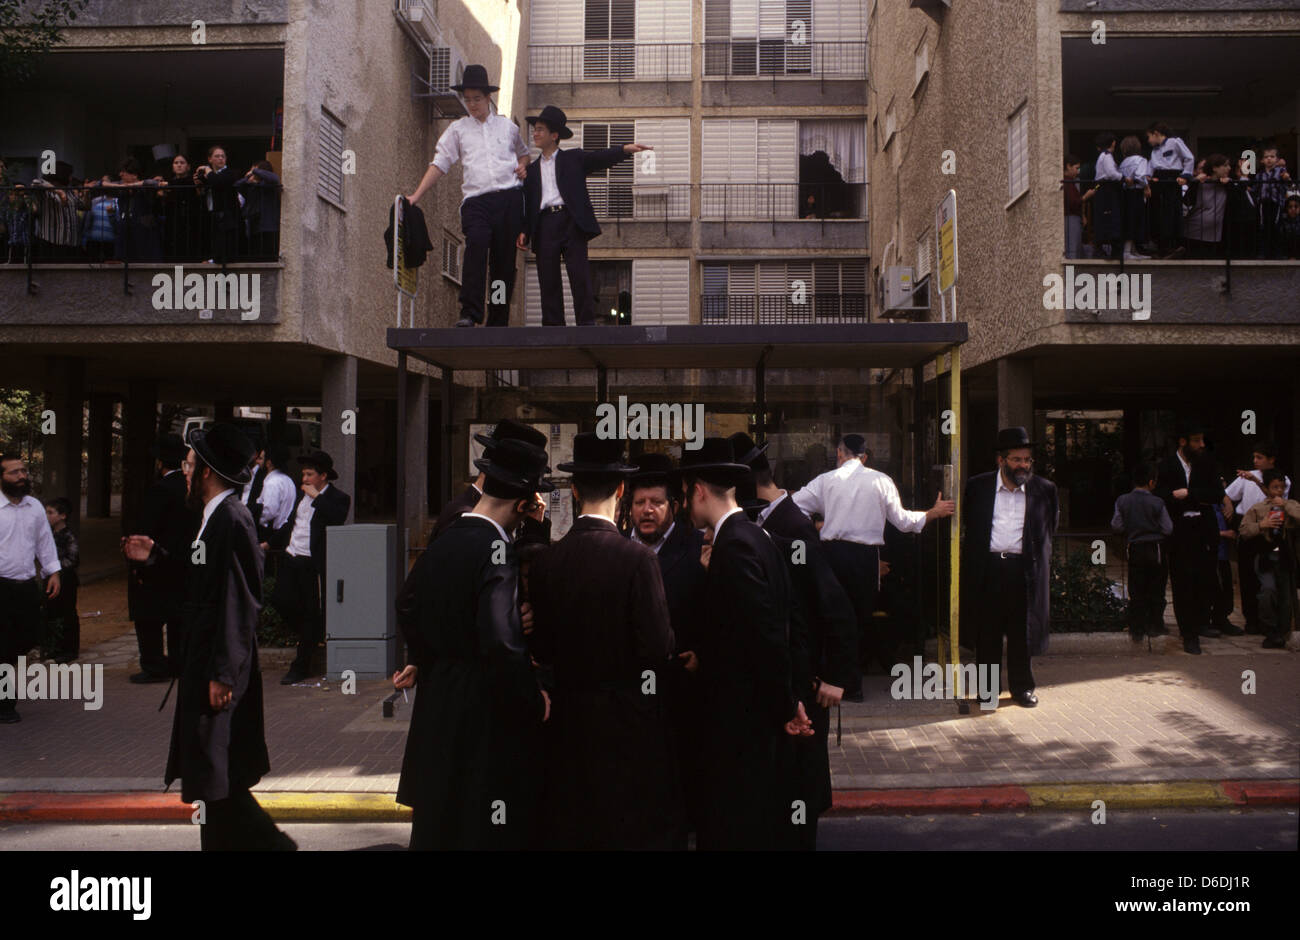 Ultra Orthodox religious Jews gathered at a neighborhood as they prepare for a funeral of a rabbi in the city of Bnei Brak or Bene Beraq a center of Haredi Judaism in Israel Stock Photo